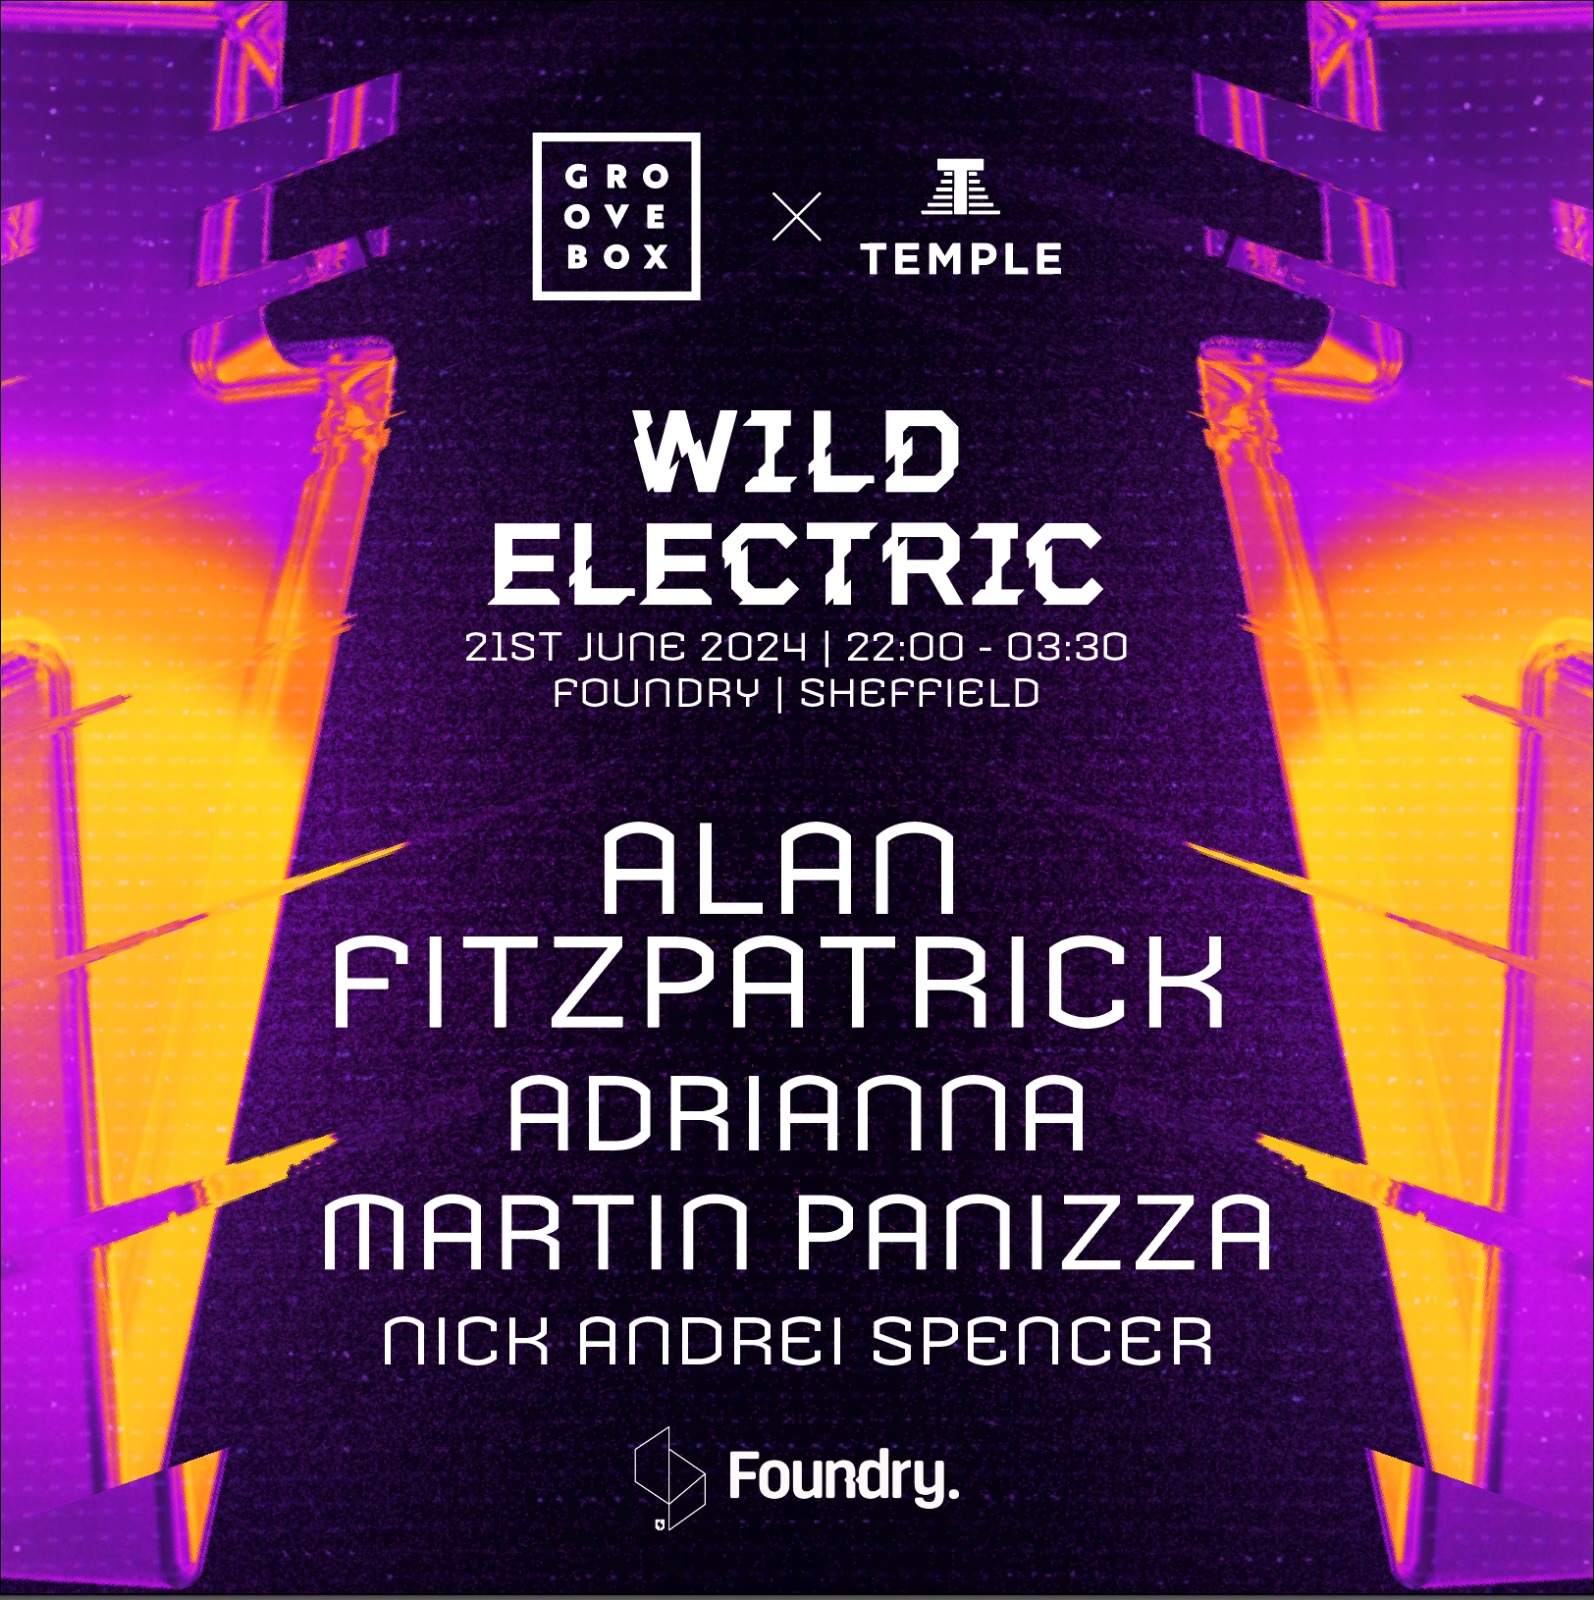 Groovebox X Temple: Wild Electric with Alan Fitzpatrick - フライヤー表